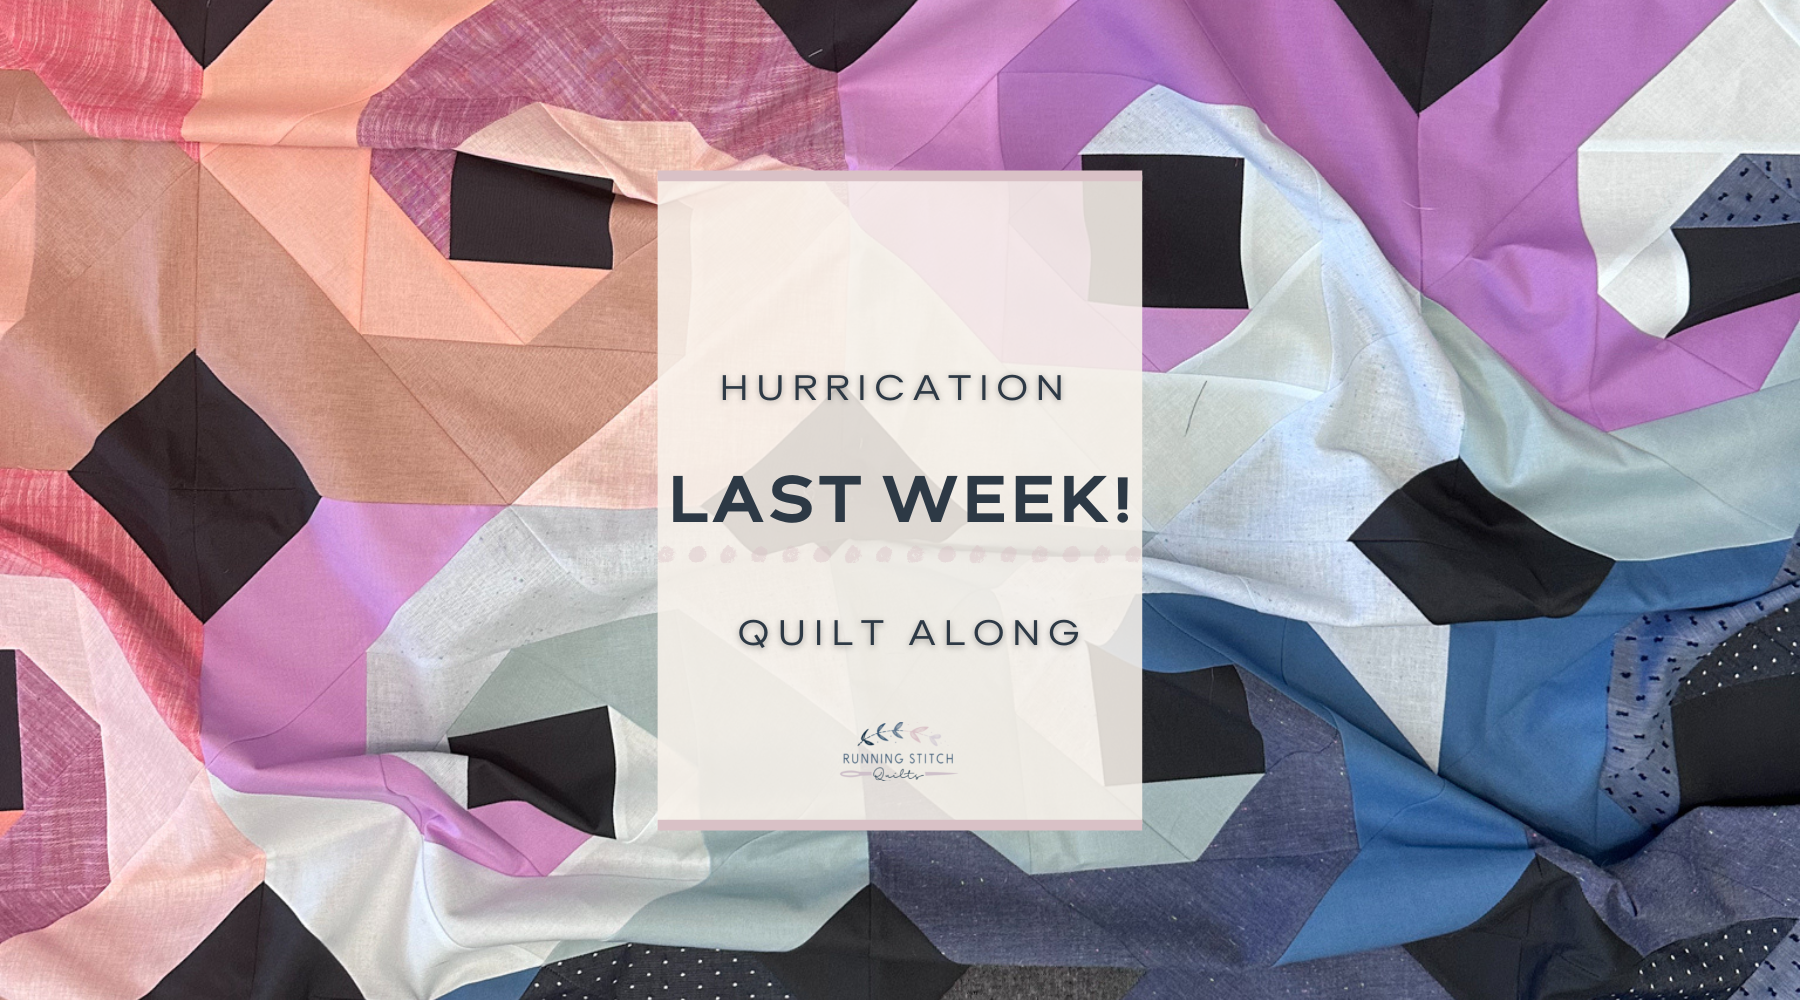 Hurrication Quilt Along - The LAST Week!